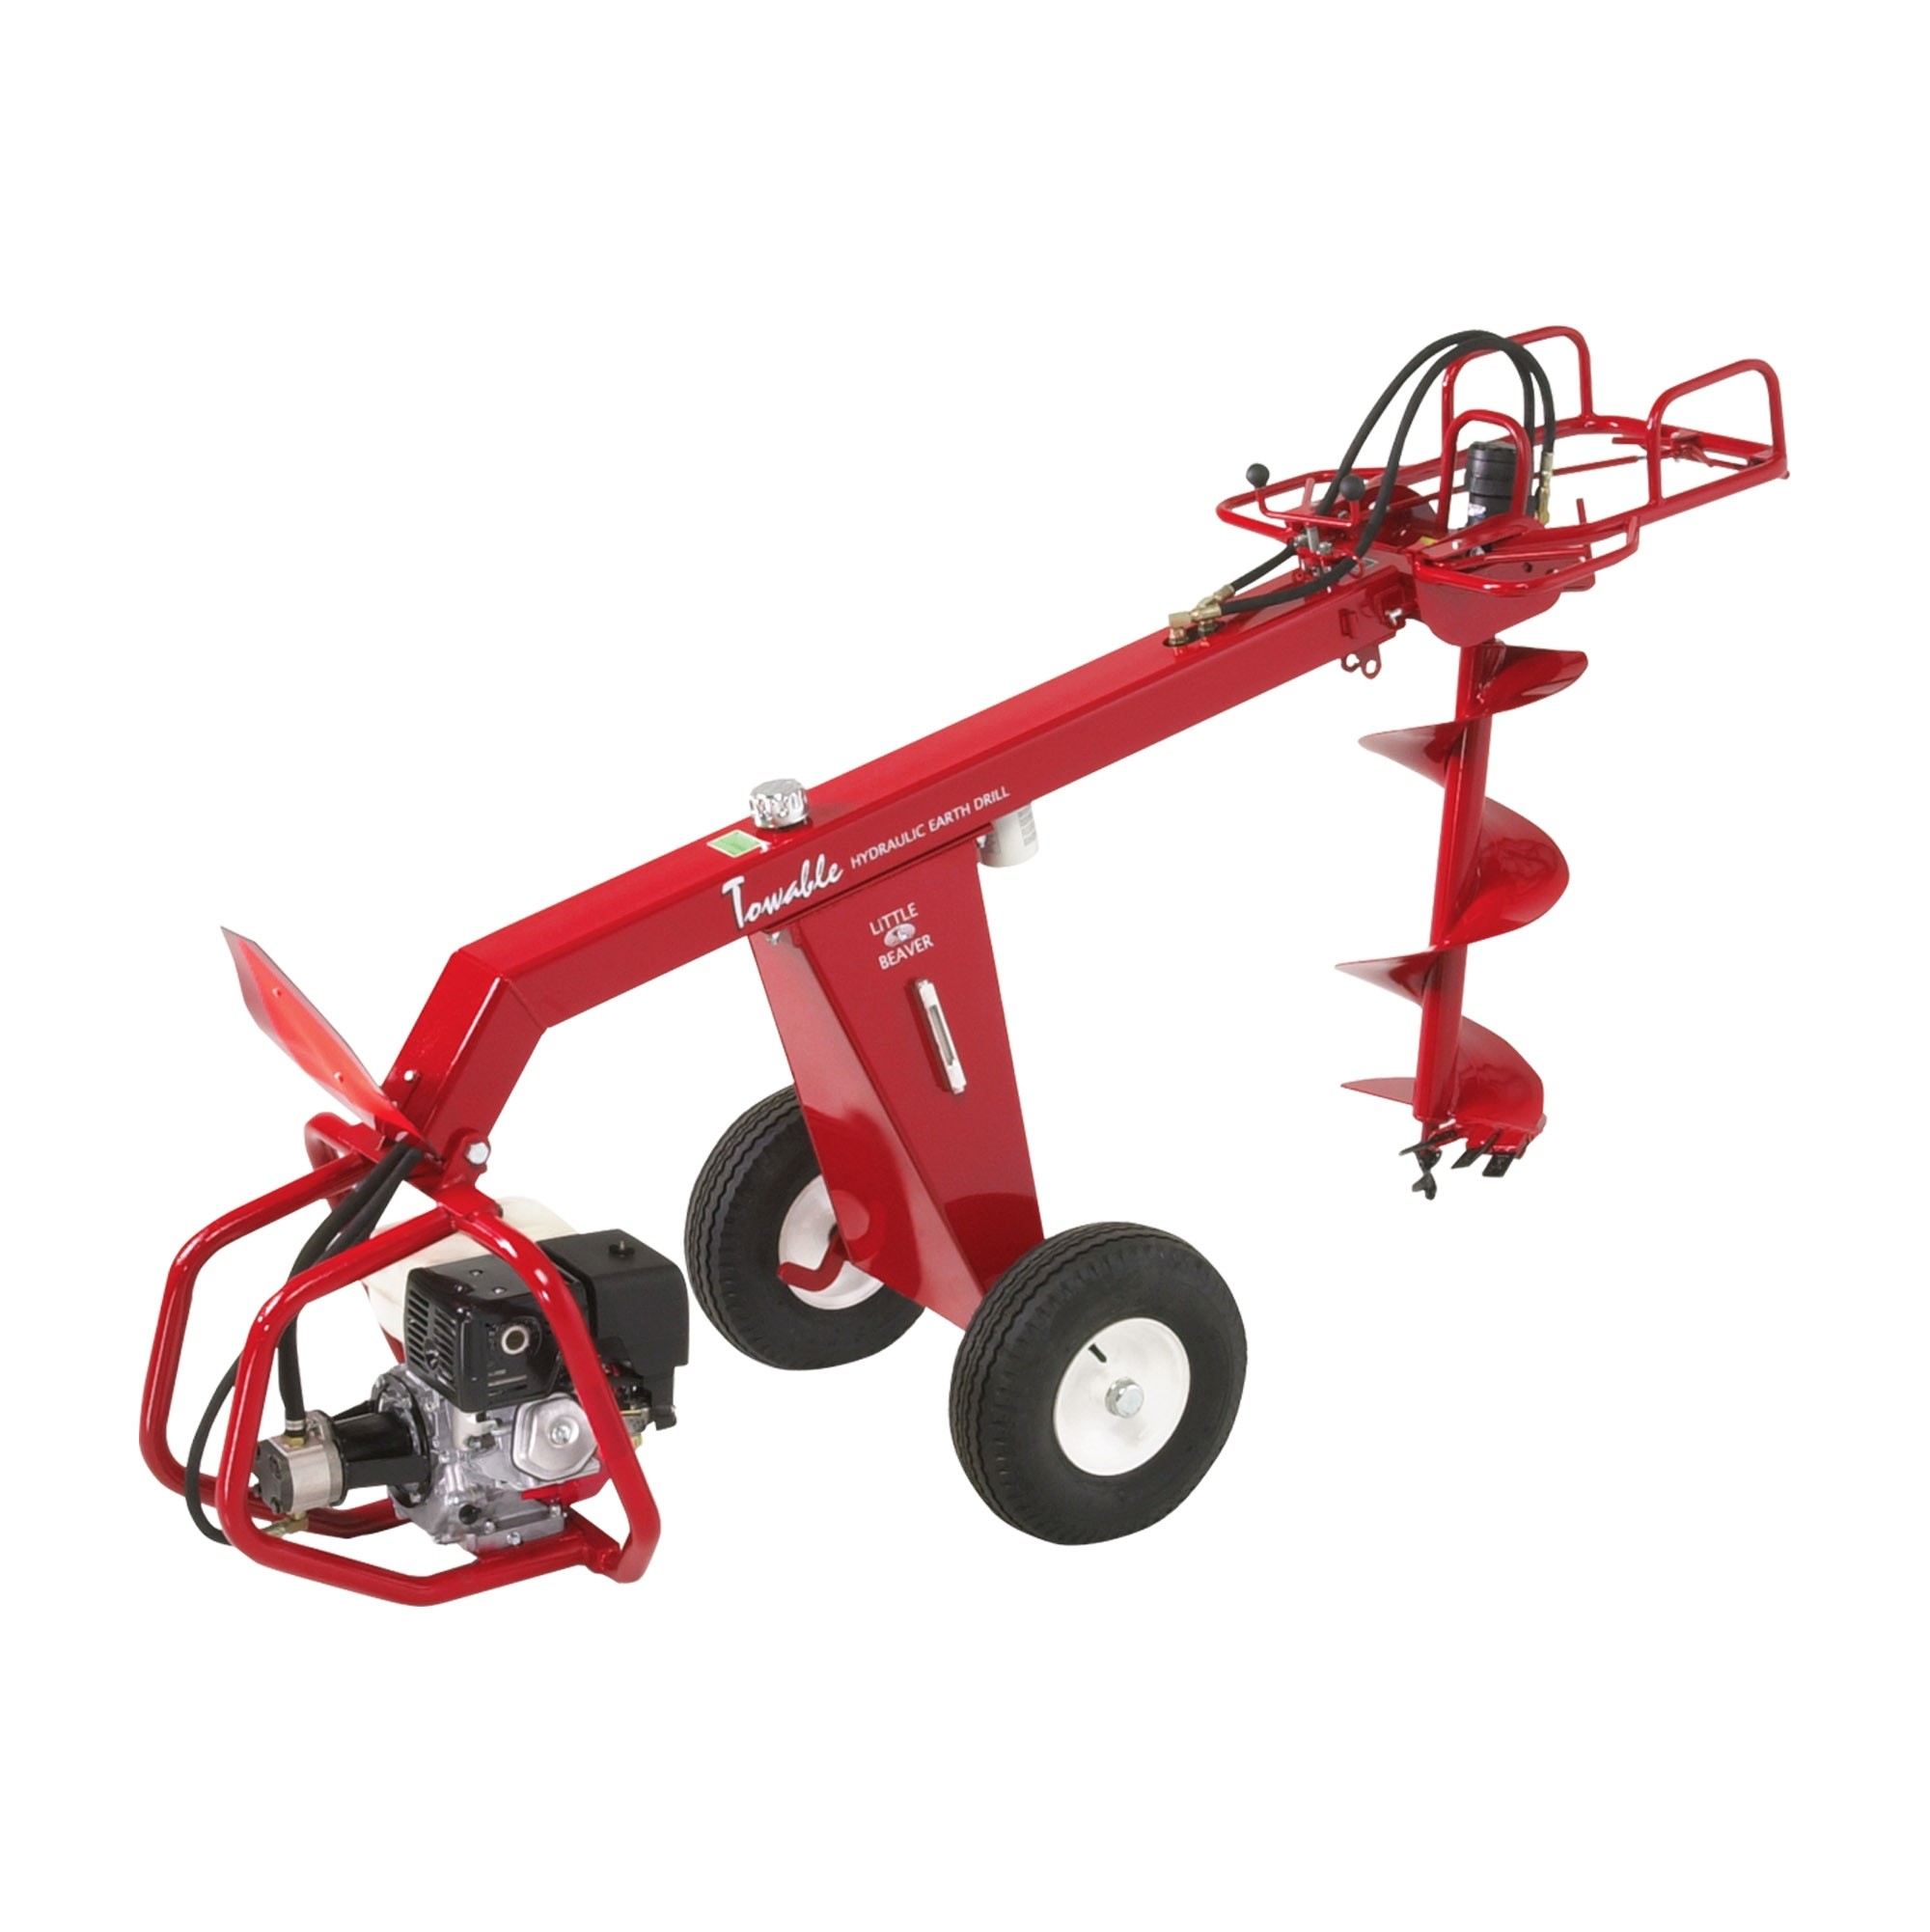 Little Beaver Hydraulic Towable Drill 11 HP Honda With Tow Bar - HYD ...